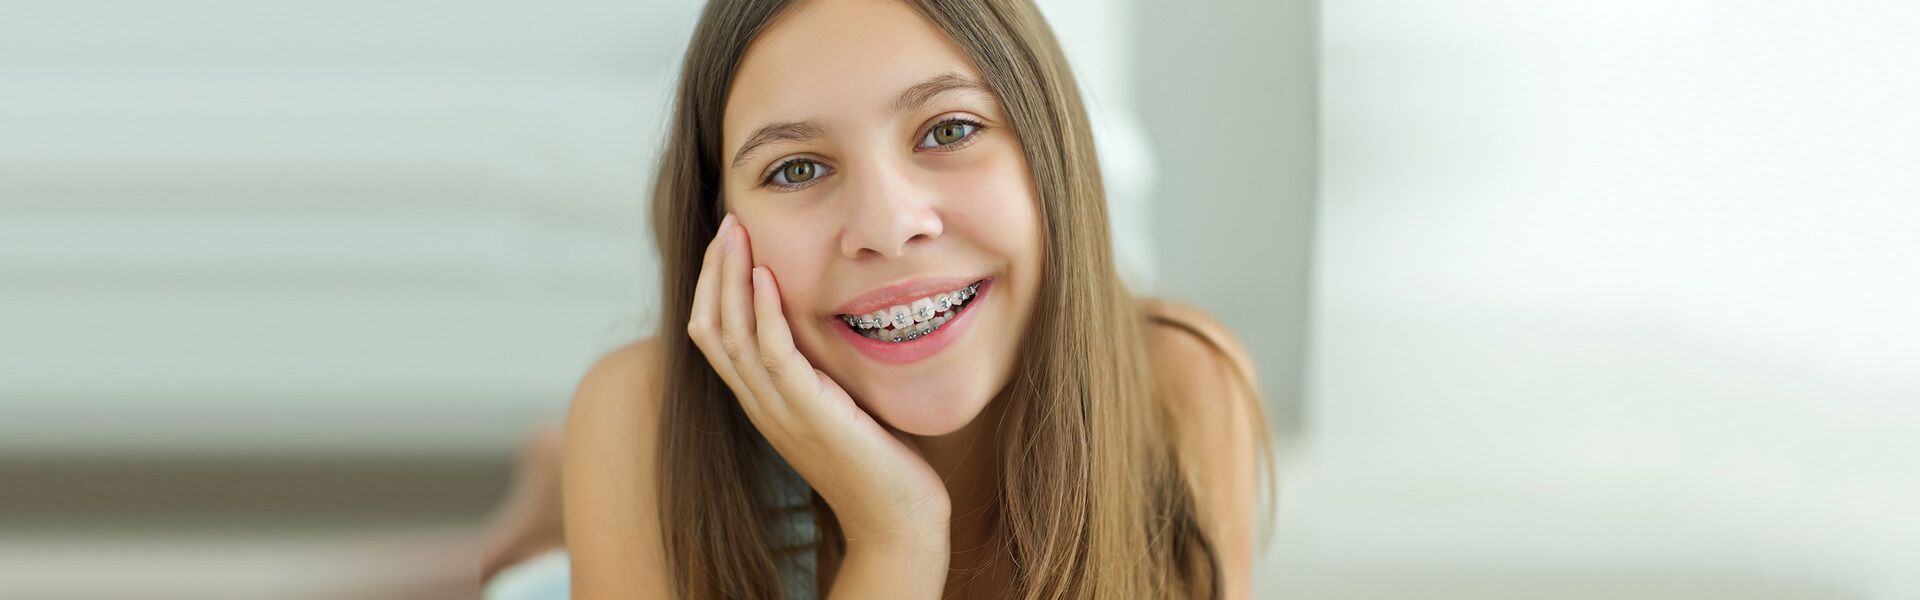 Girl after Using Braces Treatment